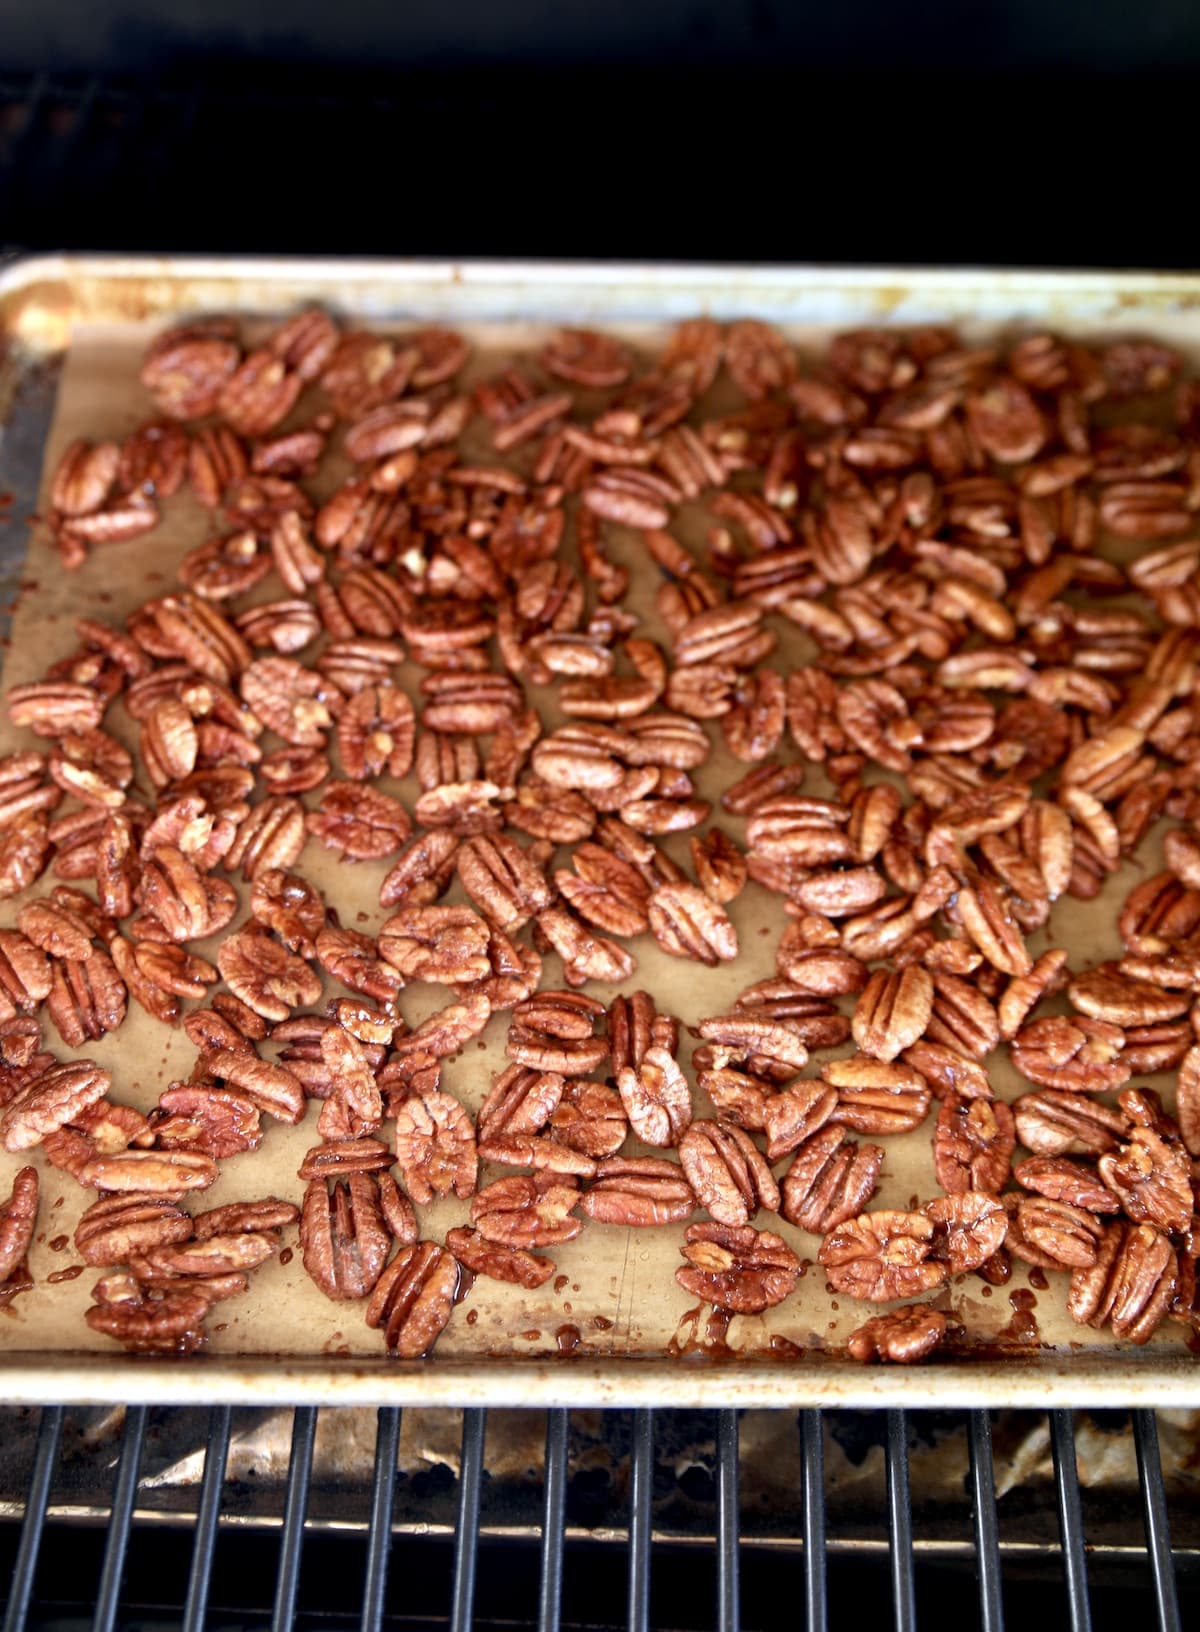 Candied pecans cooking on a pellet grill.